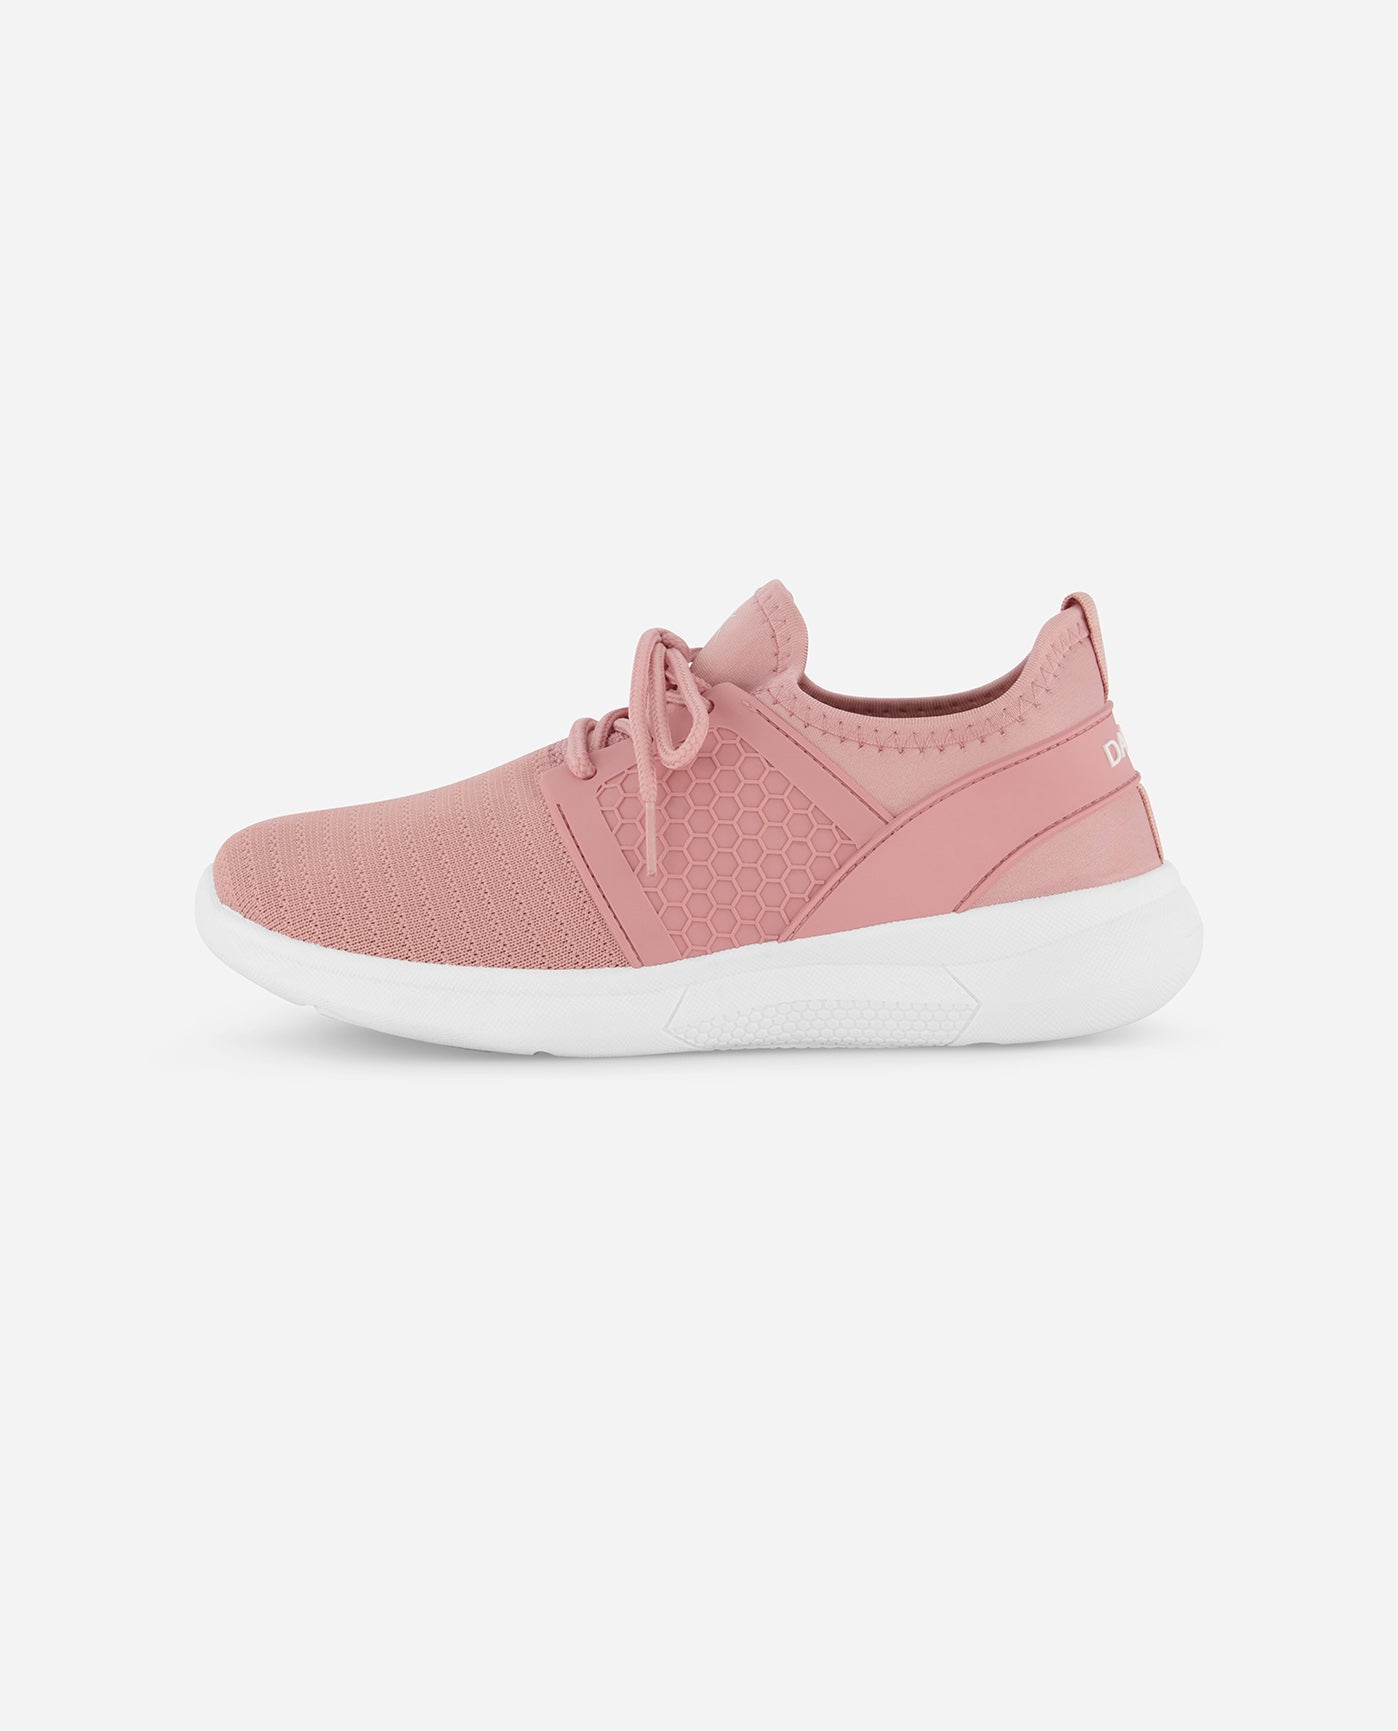 NEW DEAL: Danskin Women's Sneakers! Put some PEP in your STEP with